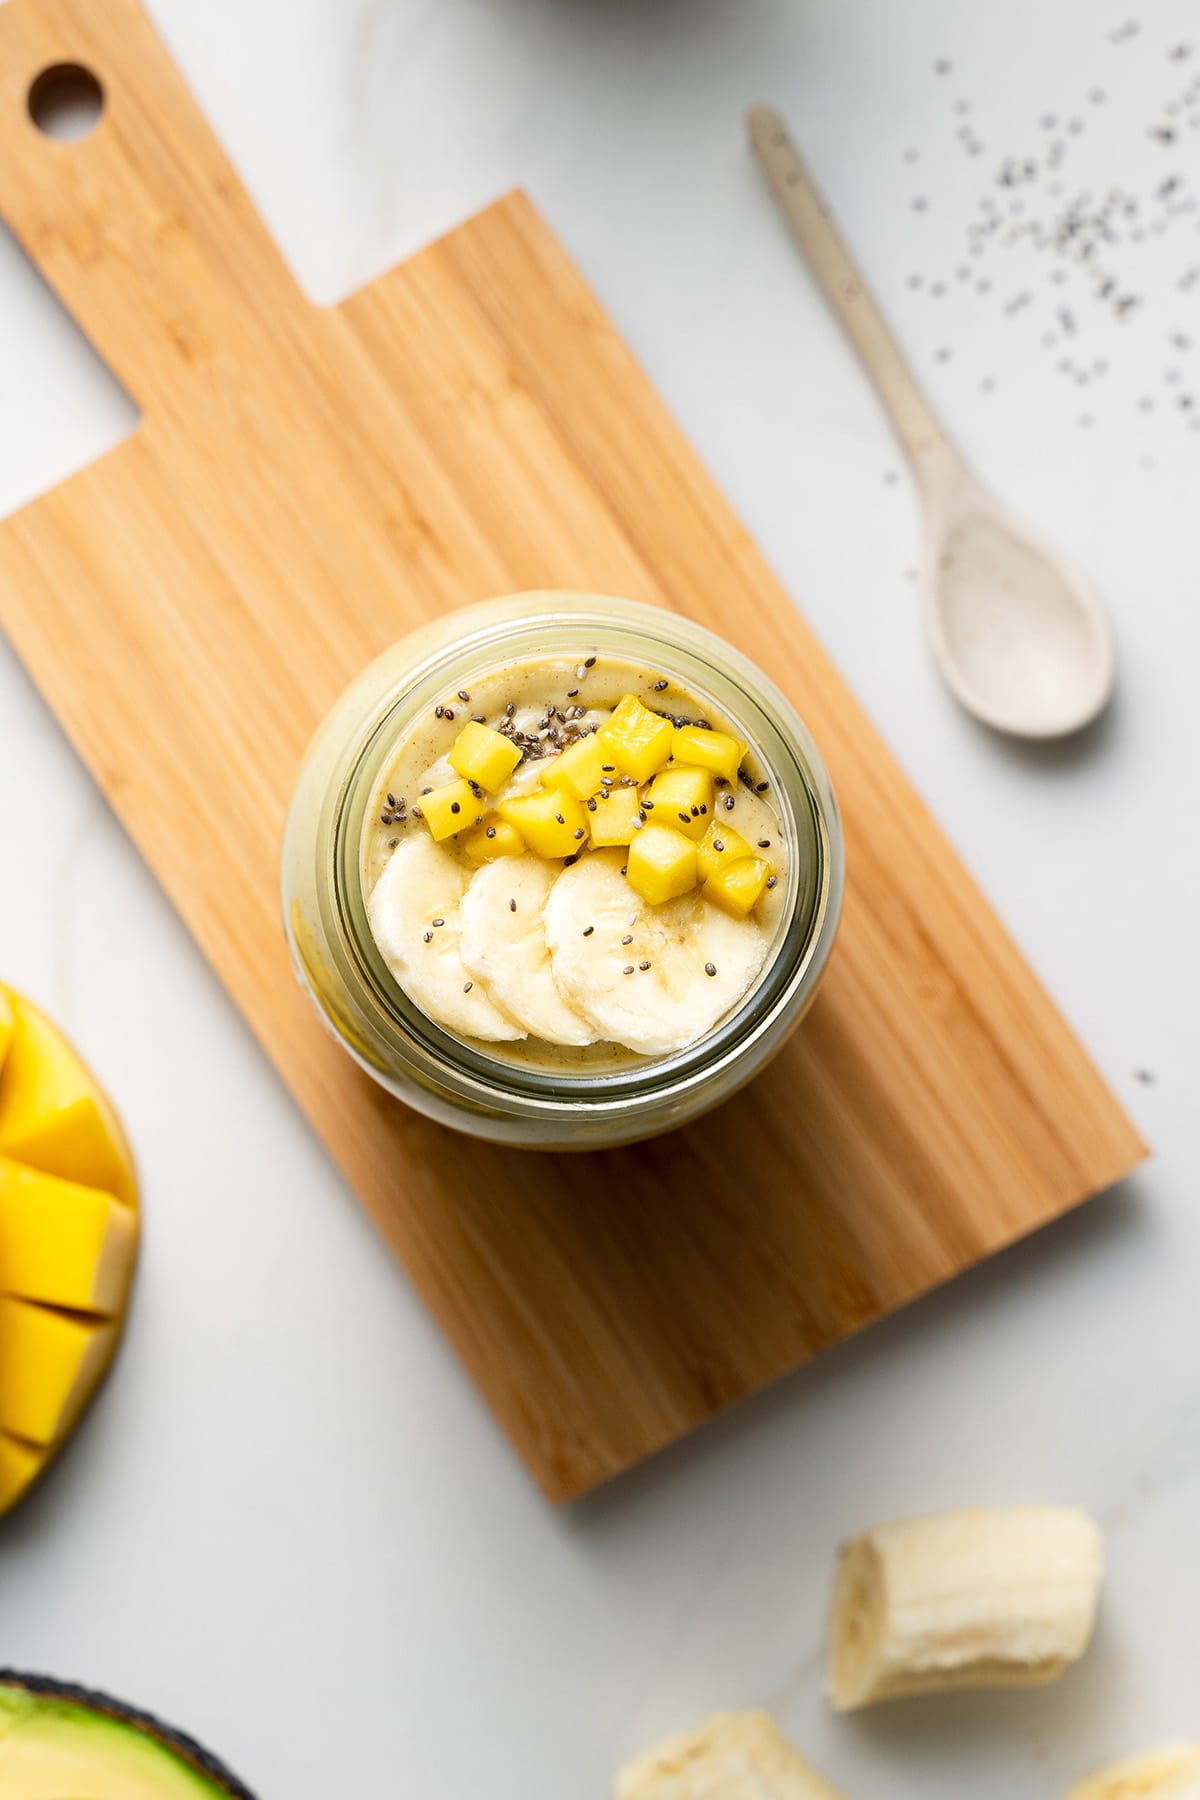 mango banana and avocado smoothie in jar on cutting board topped with banana slices and mango cubes